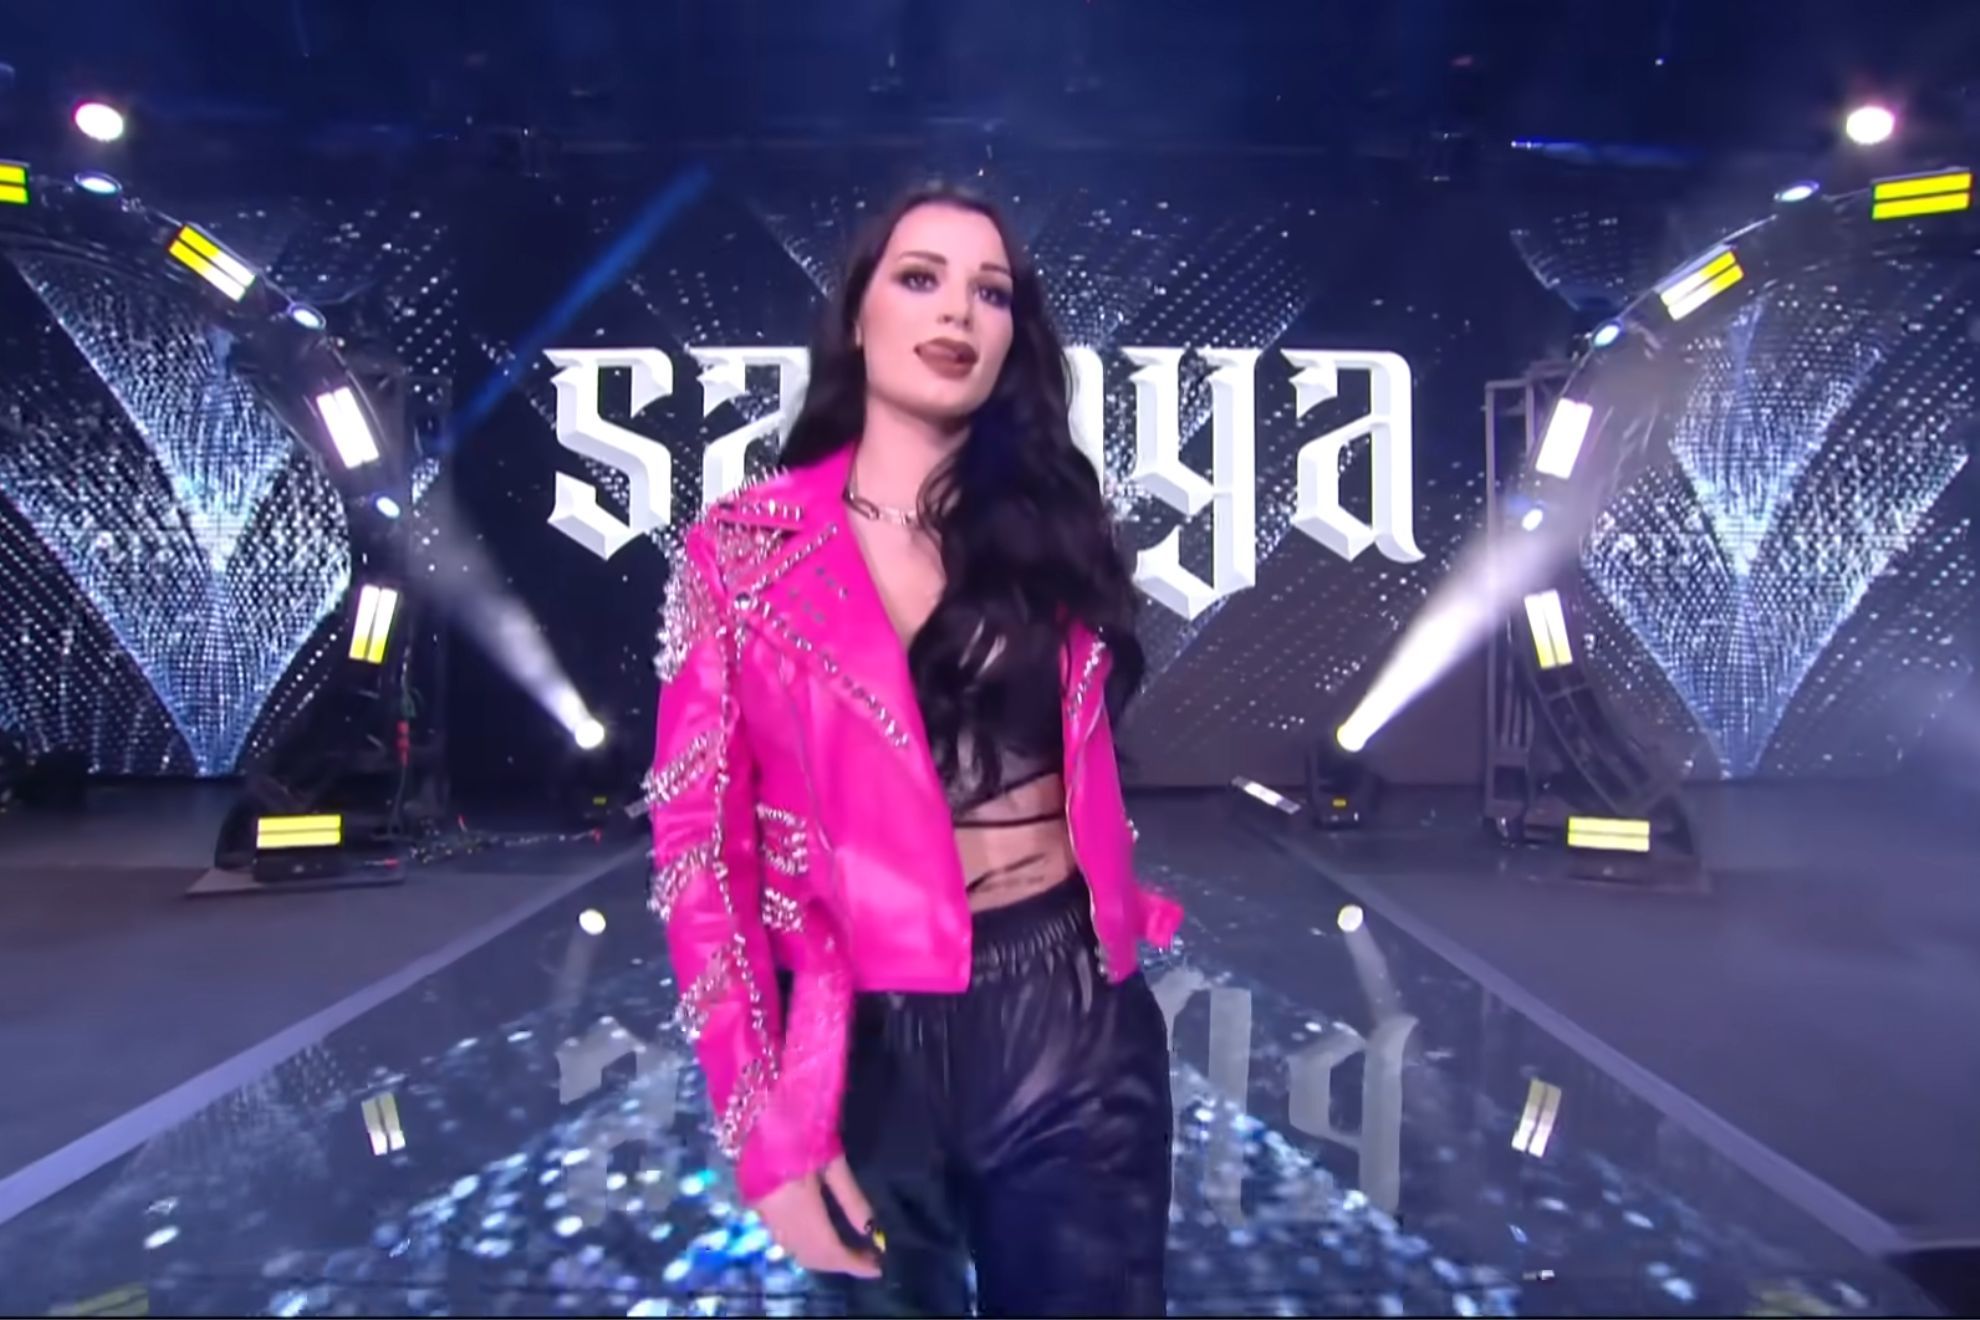 Saraya, formerly known as Paige, makes her first appearance with All Elite Wrestling. -AEW